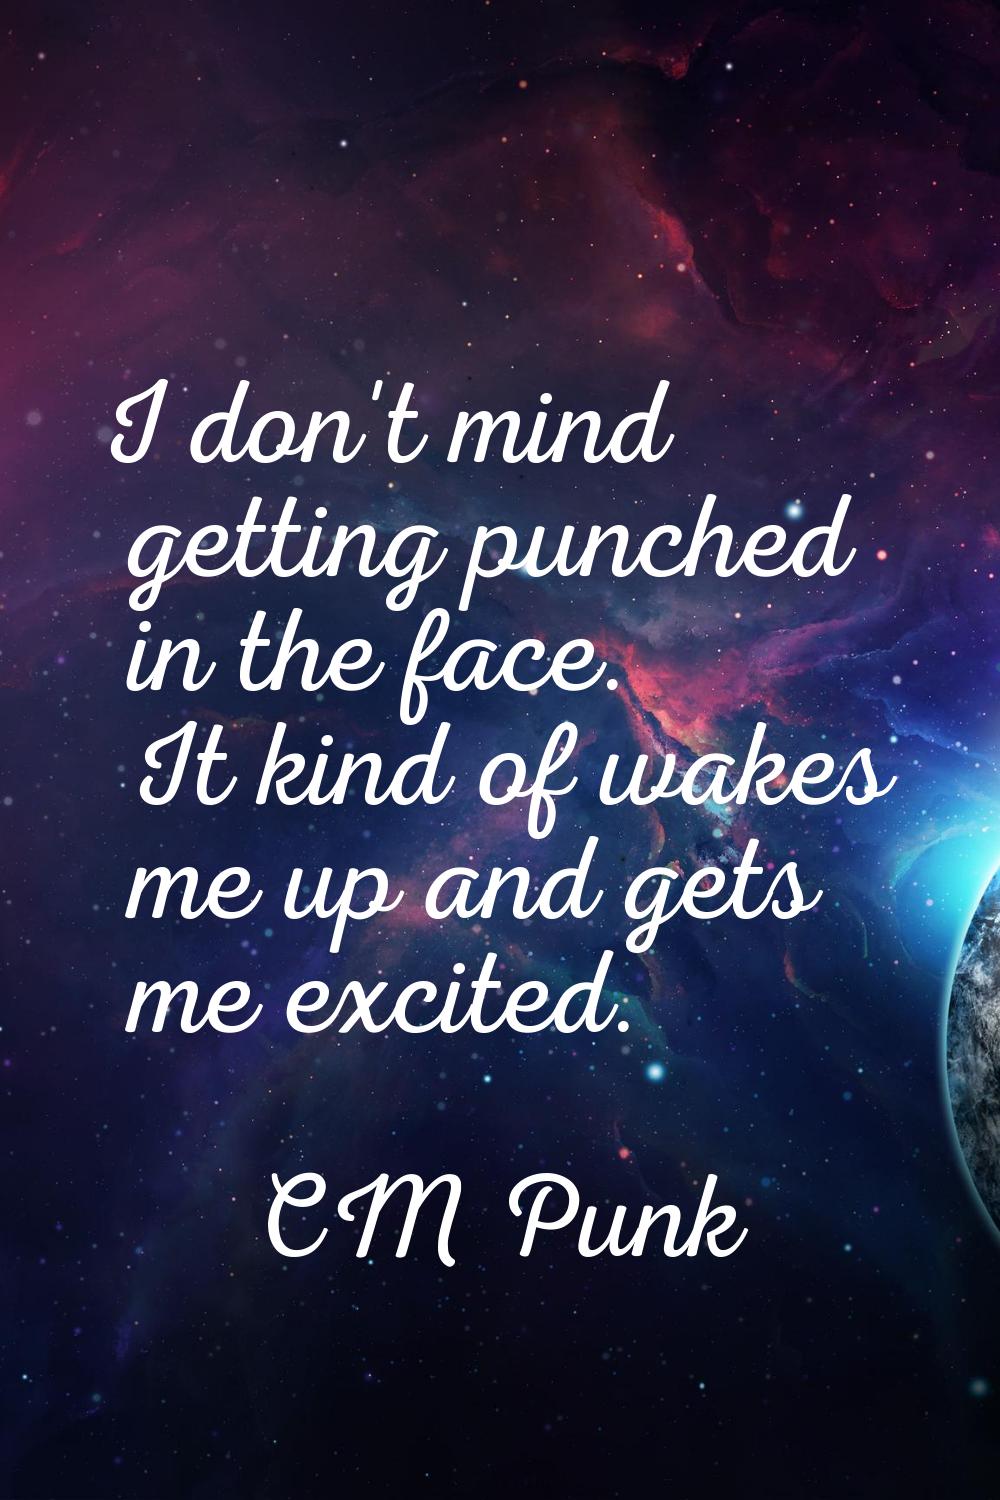 I don't mind getting punched in the face. It kind of wakes me up and gets me excited.